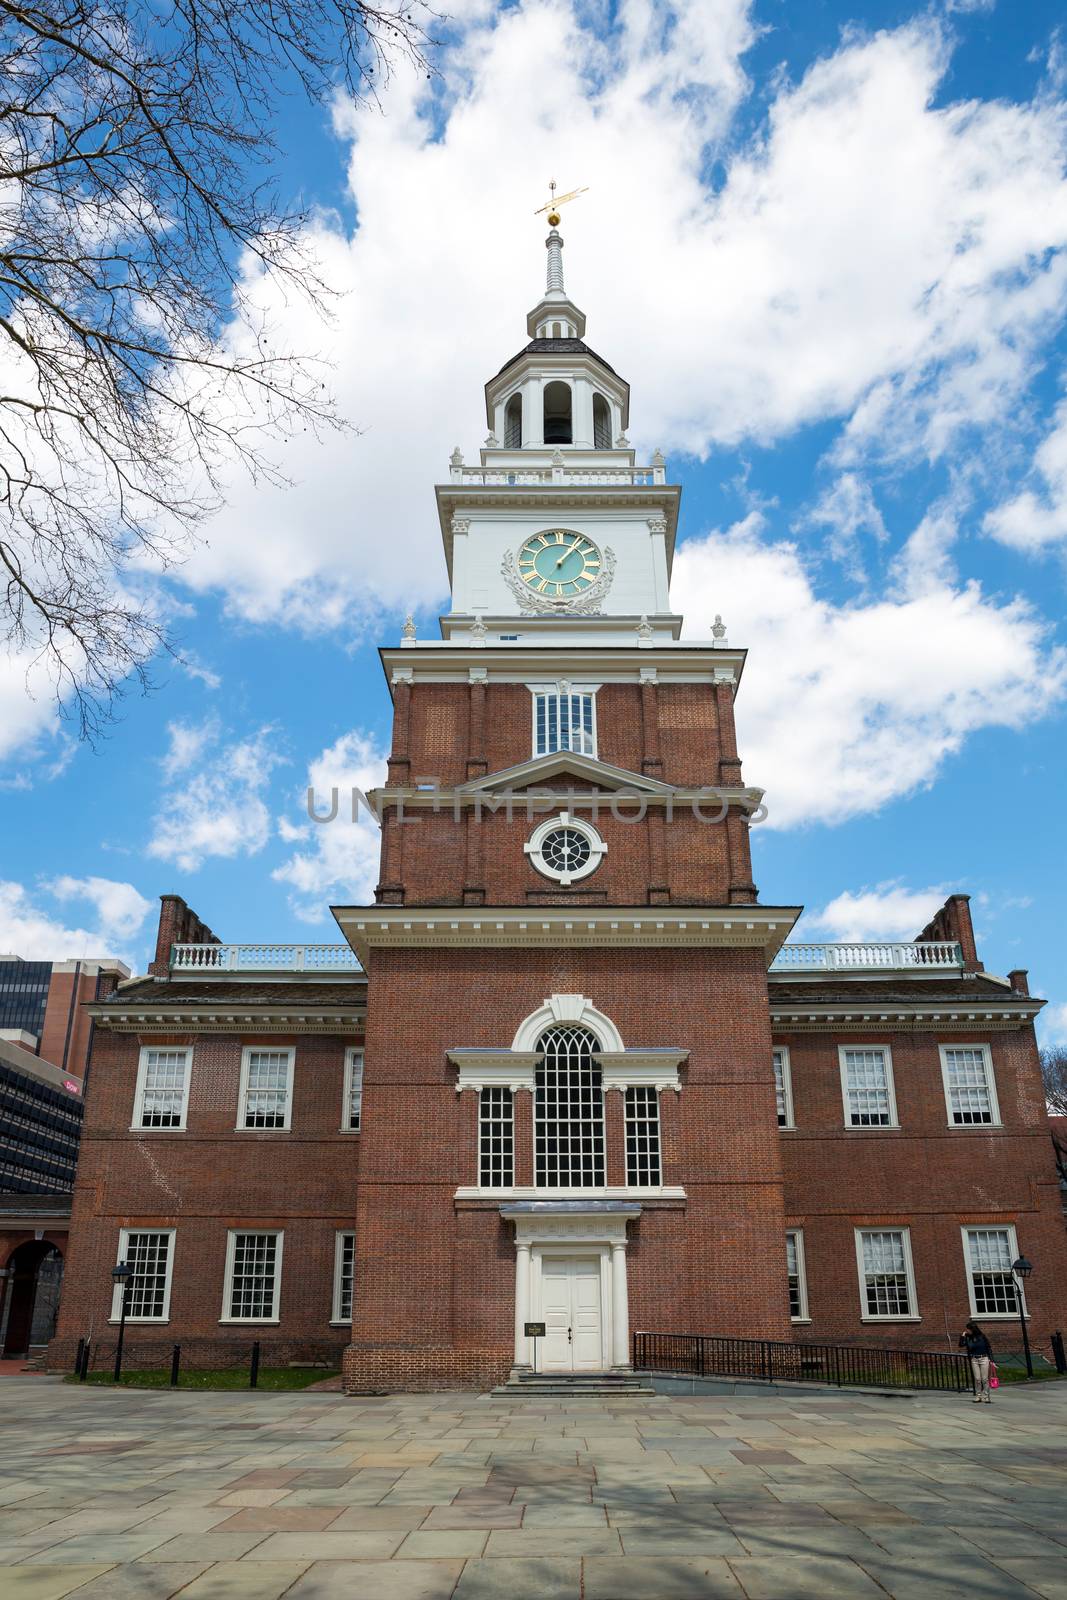 Independence Hall in Philadelphia Pennsylvania from the south side, site of the signing of the Declaration of Independence in 1776